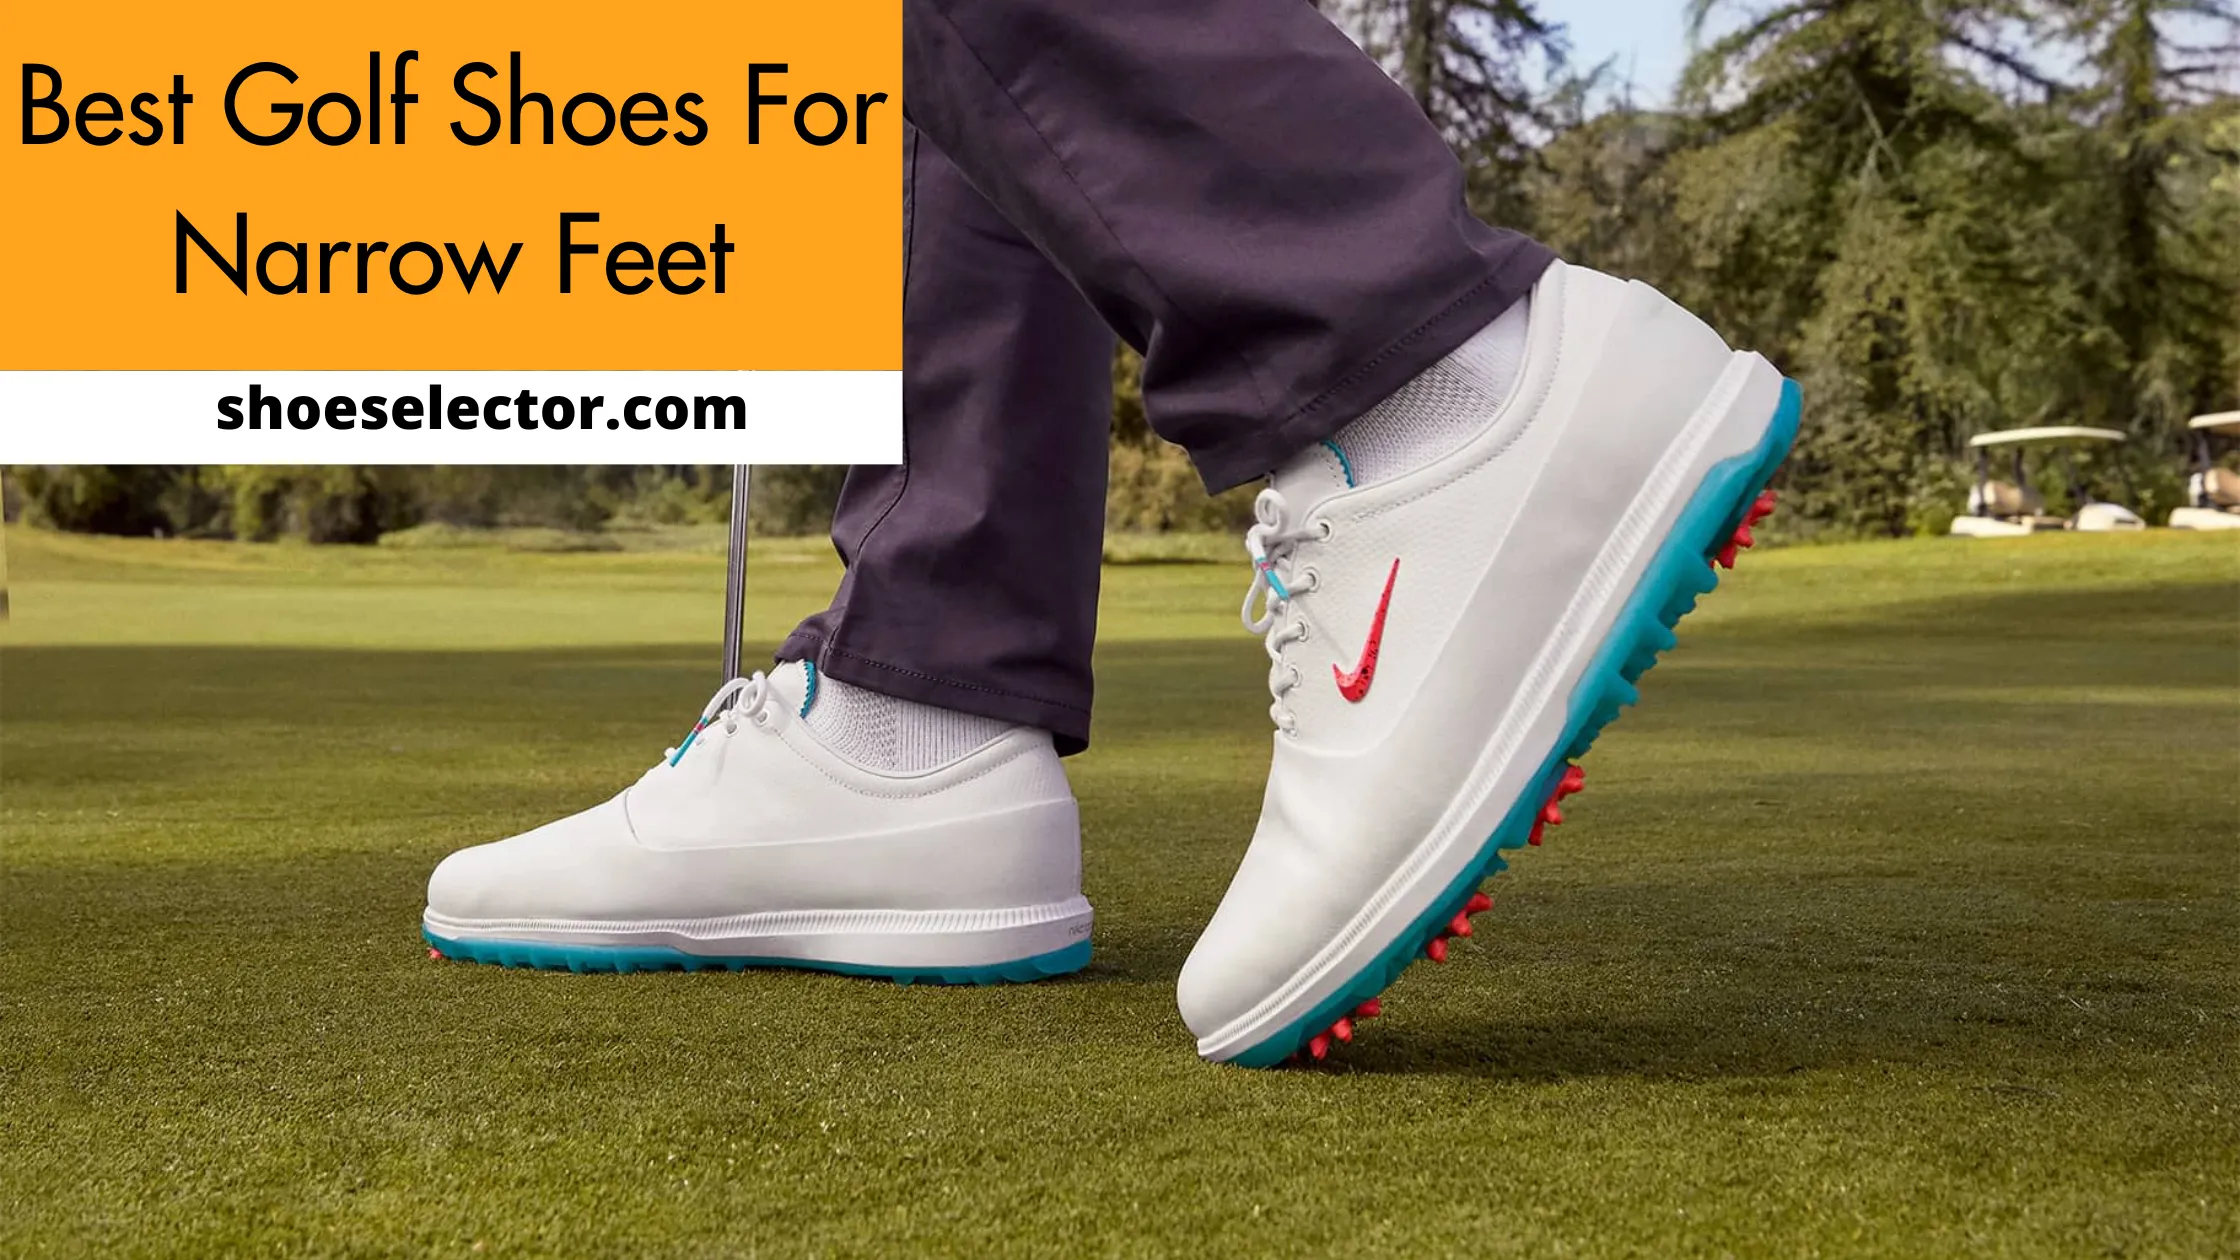 Best Golf Shoes For Narrow Feet - Complete Shopping Tips